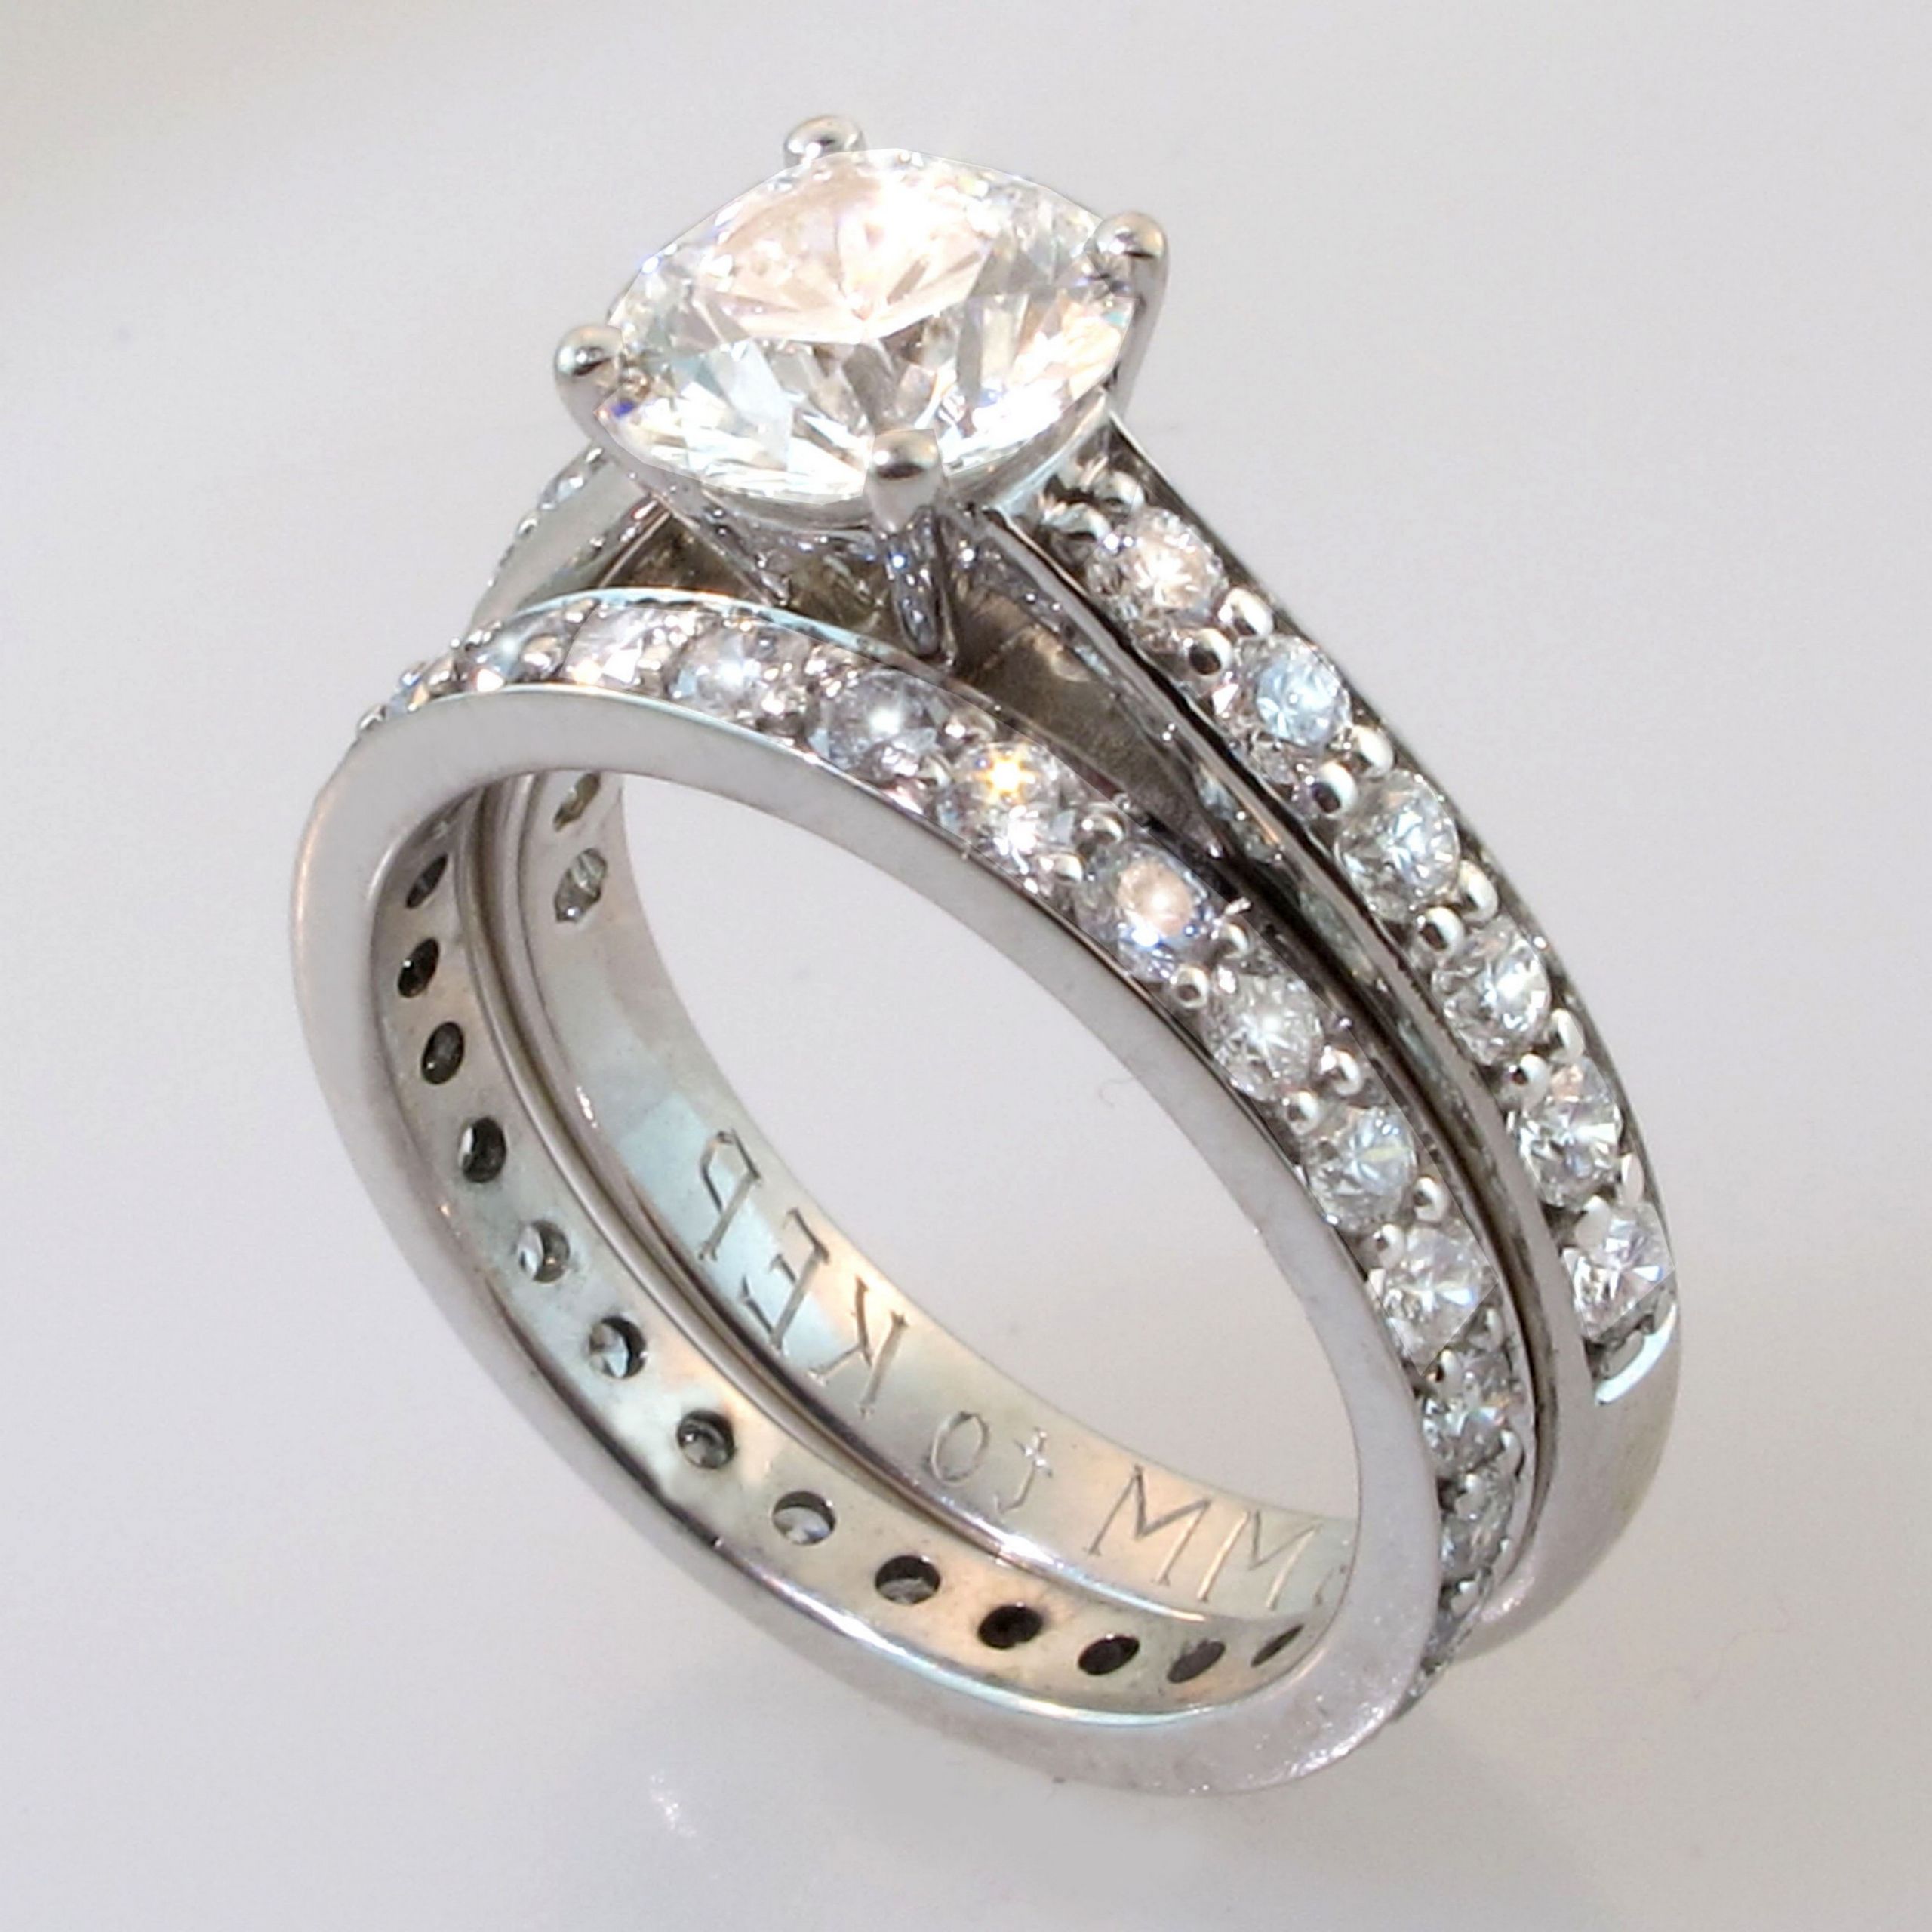 Discount Wedding Ring Sets
 Why Should Make Wedding Ring Sets For Women and Also Men